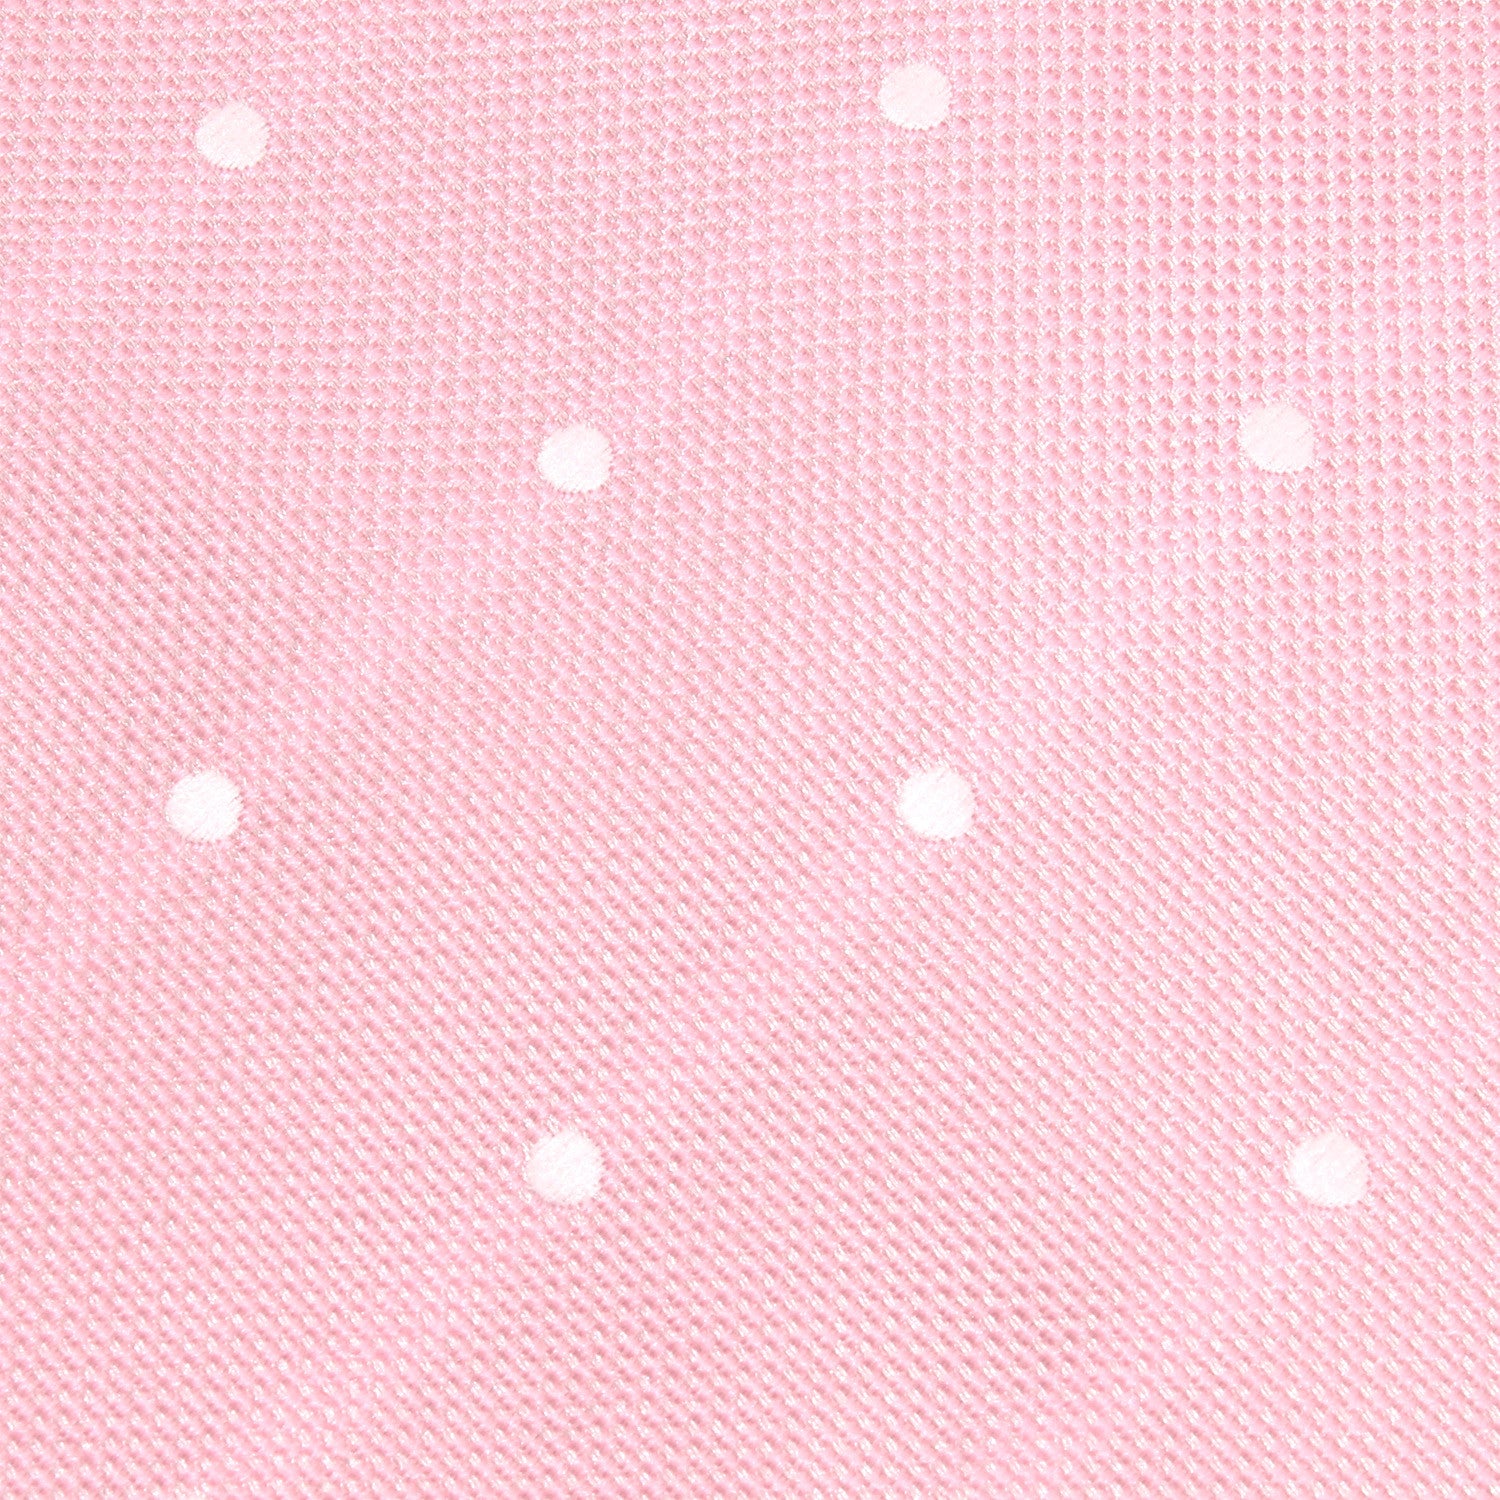 Baby Pink with White Polka Dots Skinny Tie Fabric